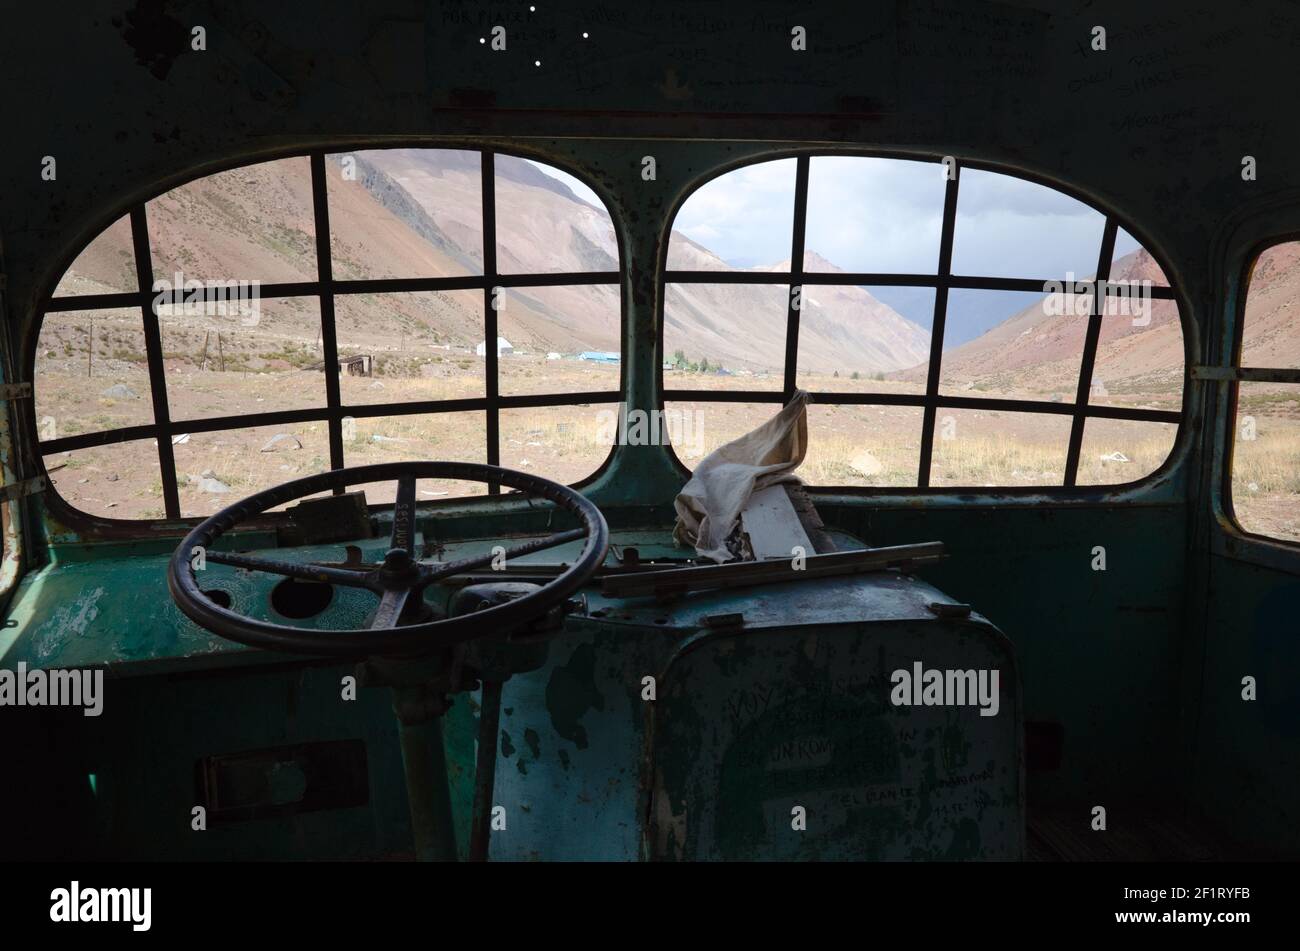 Interior of abandoned bus in a desert in Andes Mountains near Puente del Inca village, Mendoza province, Argentina Stock Photo